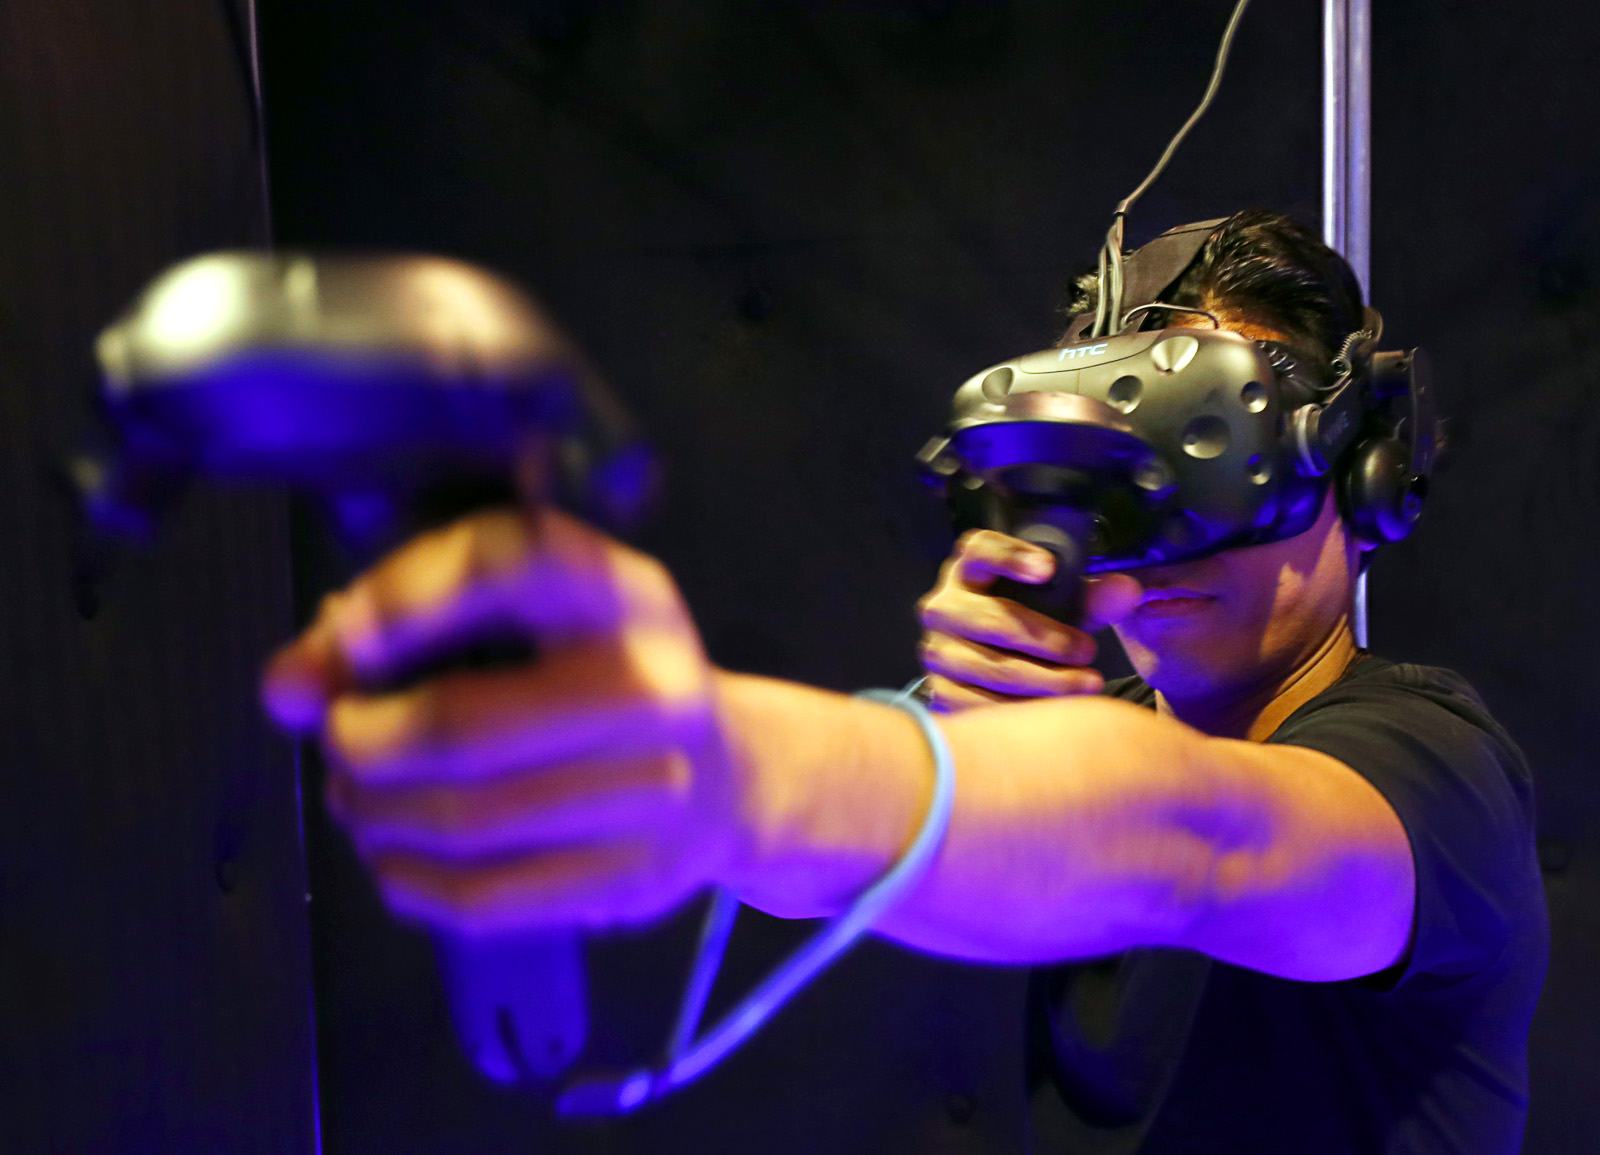 Gamble on Your Archery Skills: The Orleans Opens Virtual Zone